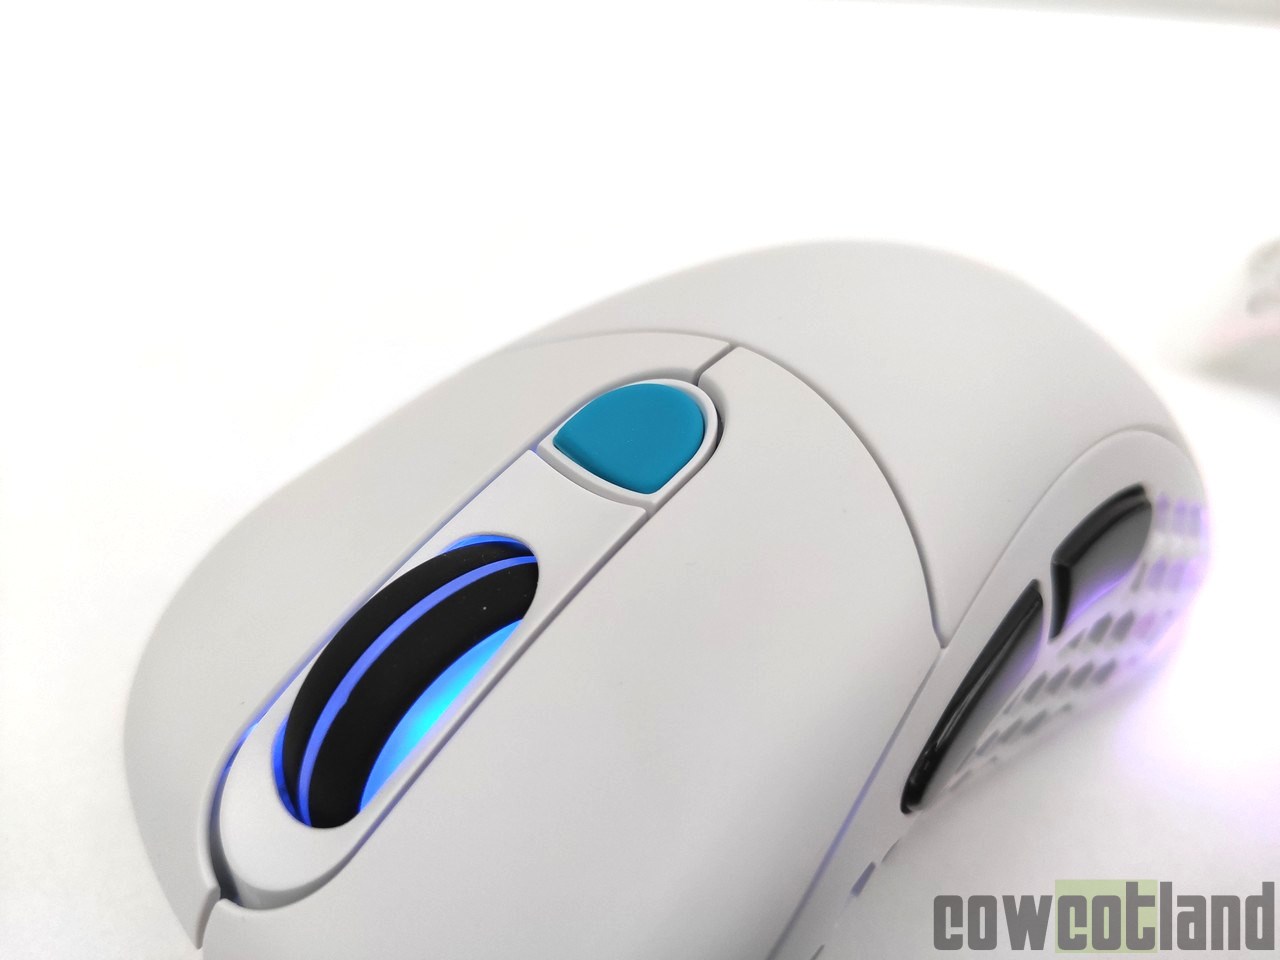 Image 43513, galerie Test souris Gaming Sharkoon Light 200 : Zowie-Killer ?